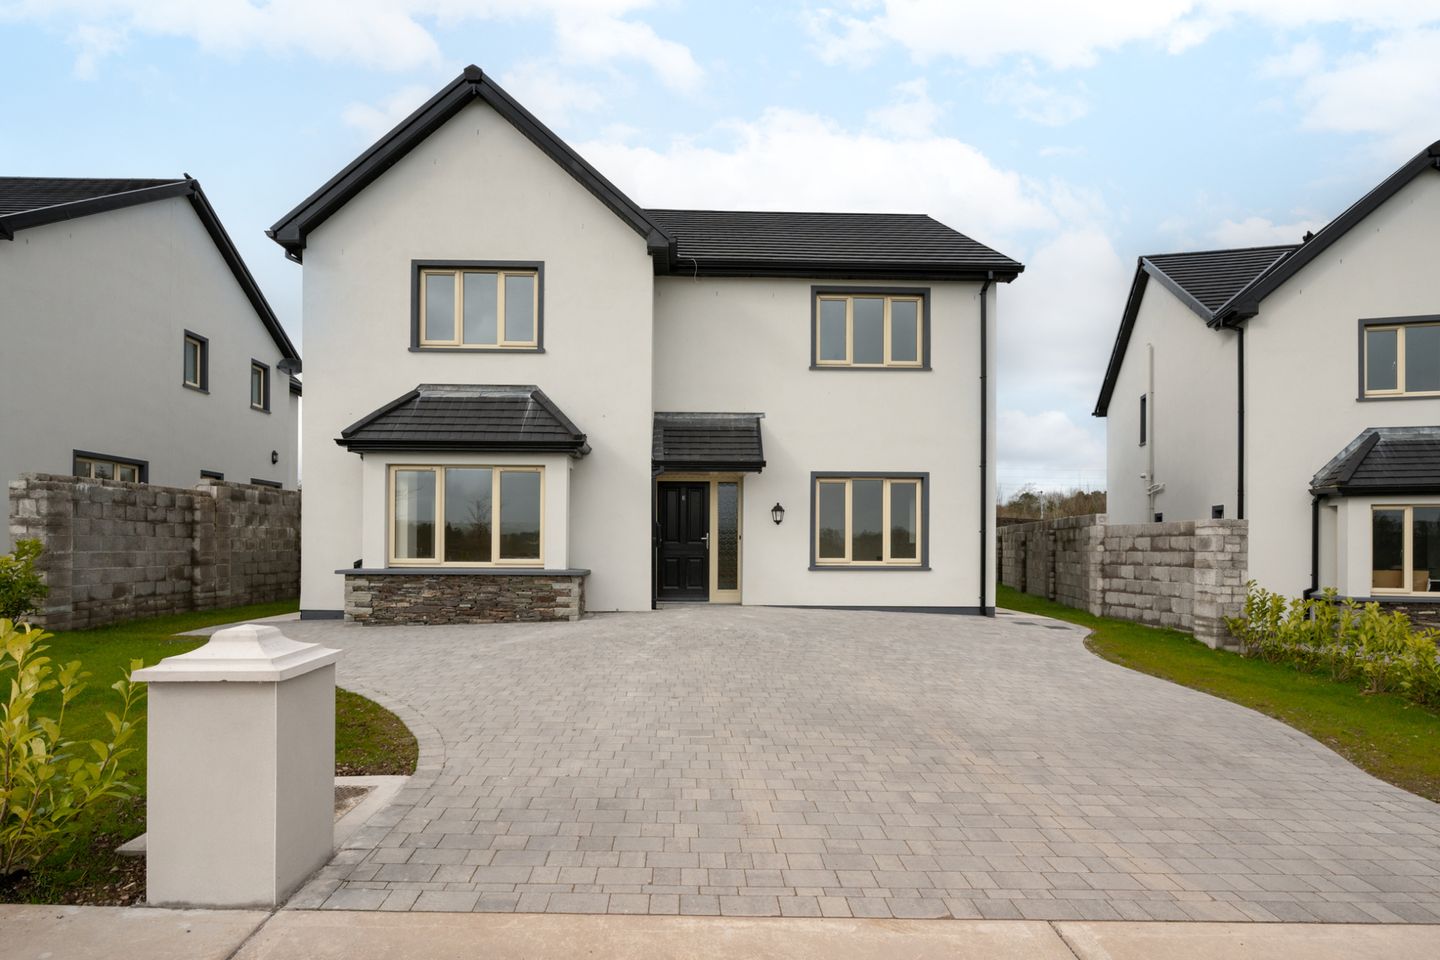 Type B1 - Four Bed Detached, Cnoic Eoin, Type B1 - Four Bed Detached, Cnoic Eoin, Coachford, Co. Cork